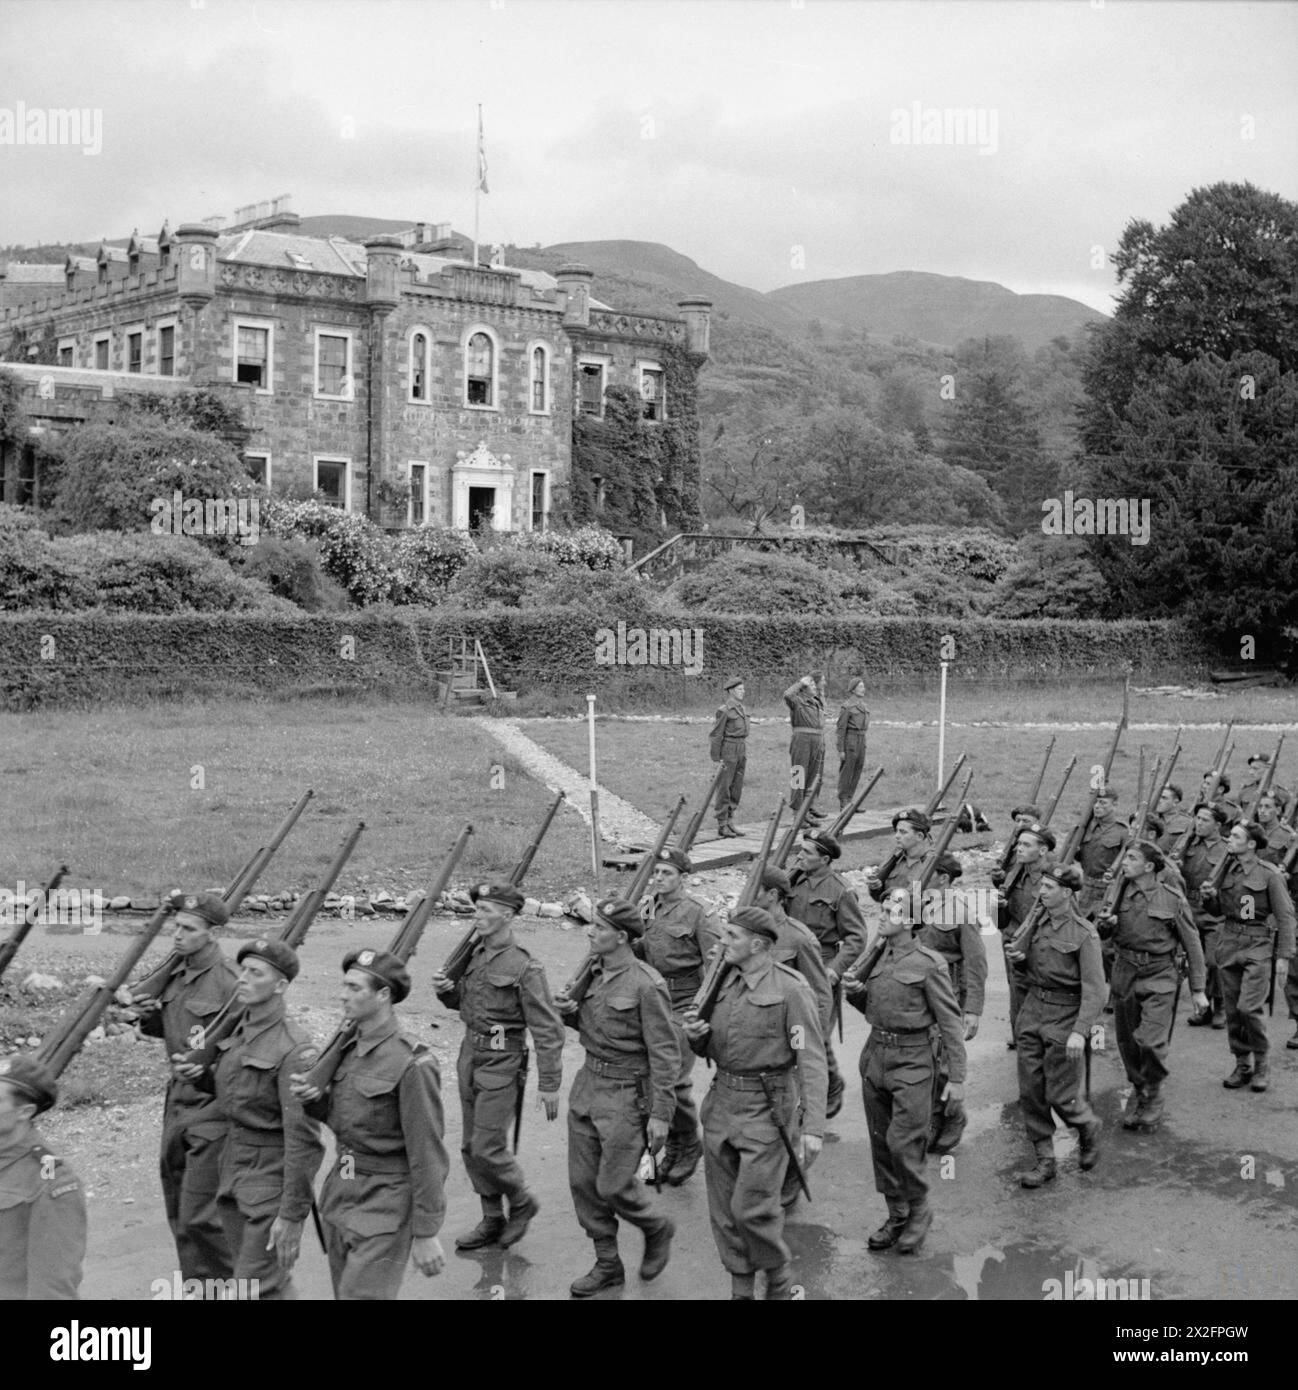 THE FREE FRENCH ARMY IN THE UNITED KINGDOM 1939-1945 - French commando troops undergoing training at Achnacarry House in Scotland: Free French troops, headed by the Commando Depot Pipe Band, march past the Commandant, who is seen taking the salute, with the Free French flag flying from Achnacarry House in the background Free French Army Stock Photo